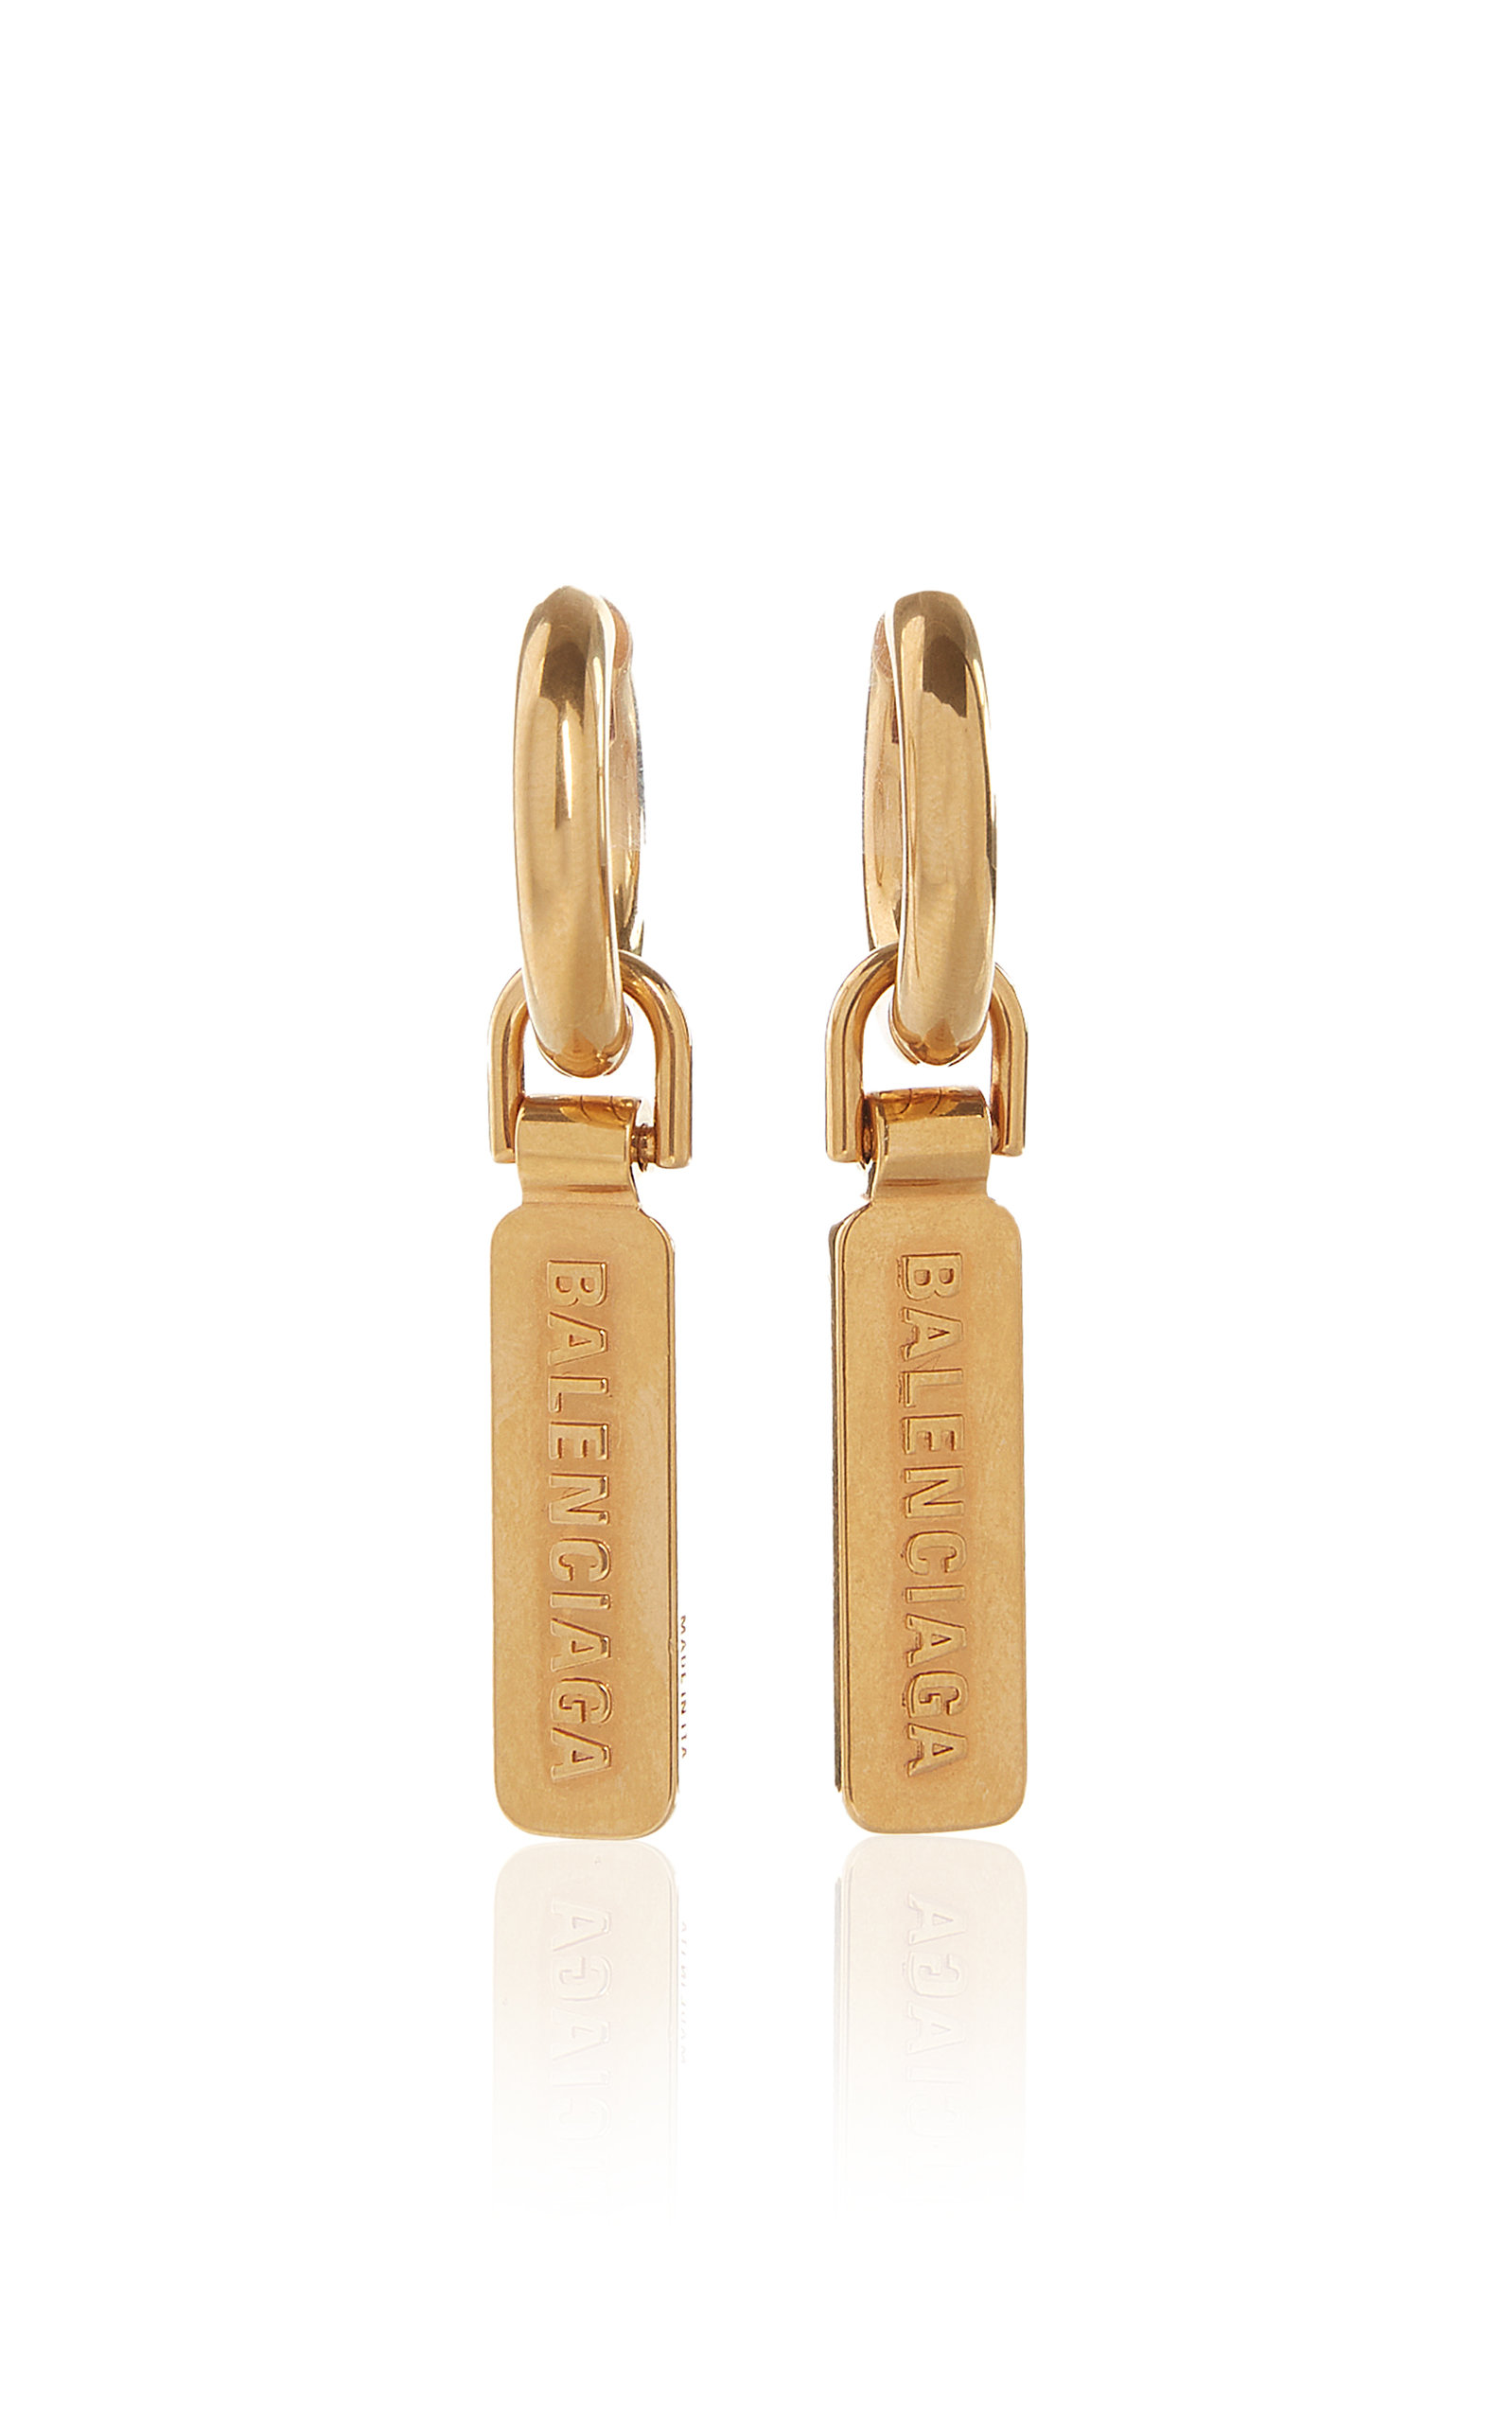 Balenciaga - Skate Tag Gold-Plated Earrings - Gold - OS - Moda Operandi - Gifts For Her